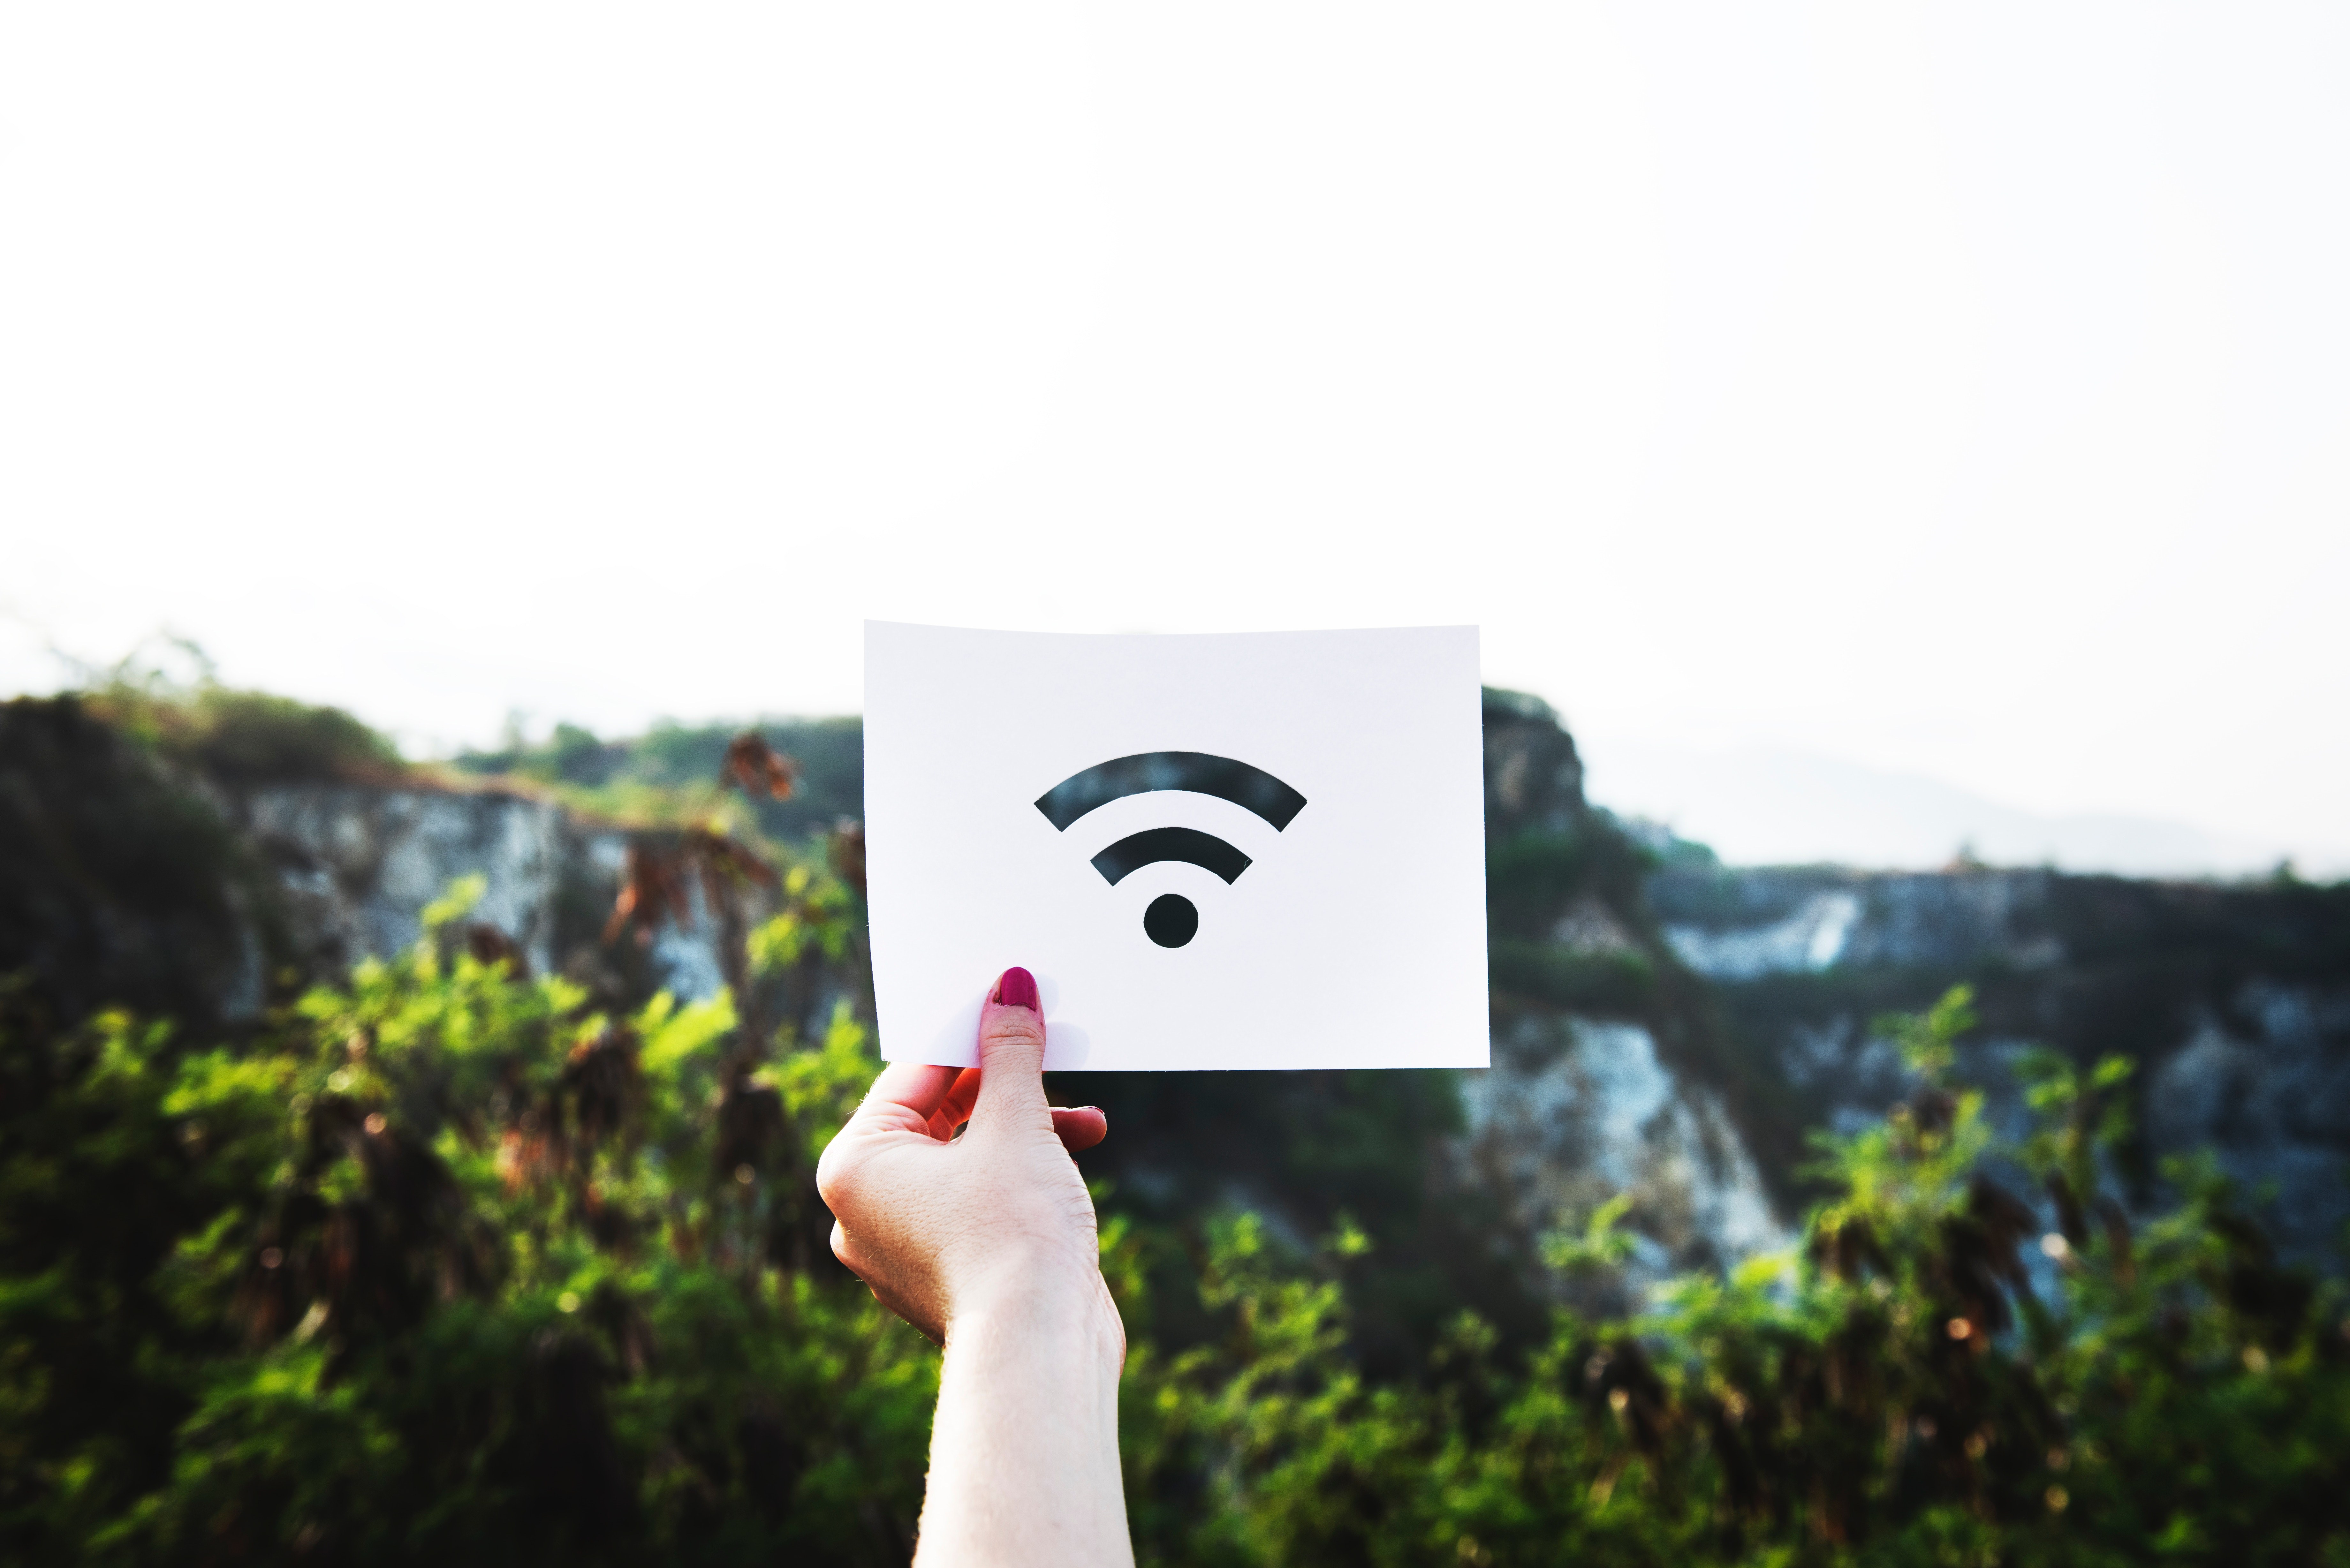 Hotels that fail to offer free Wi-Fi risk losing a connection with their customers.